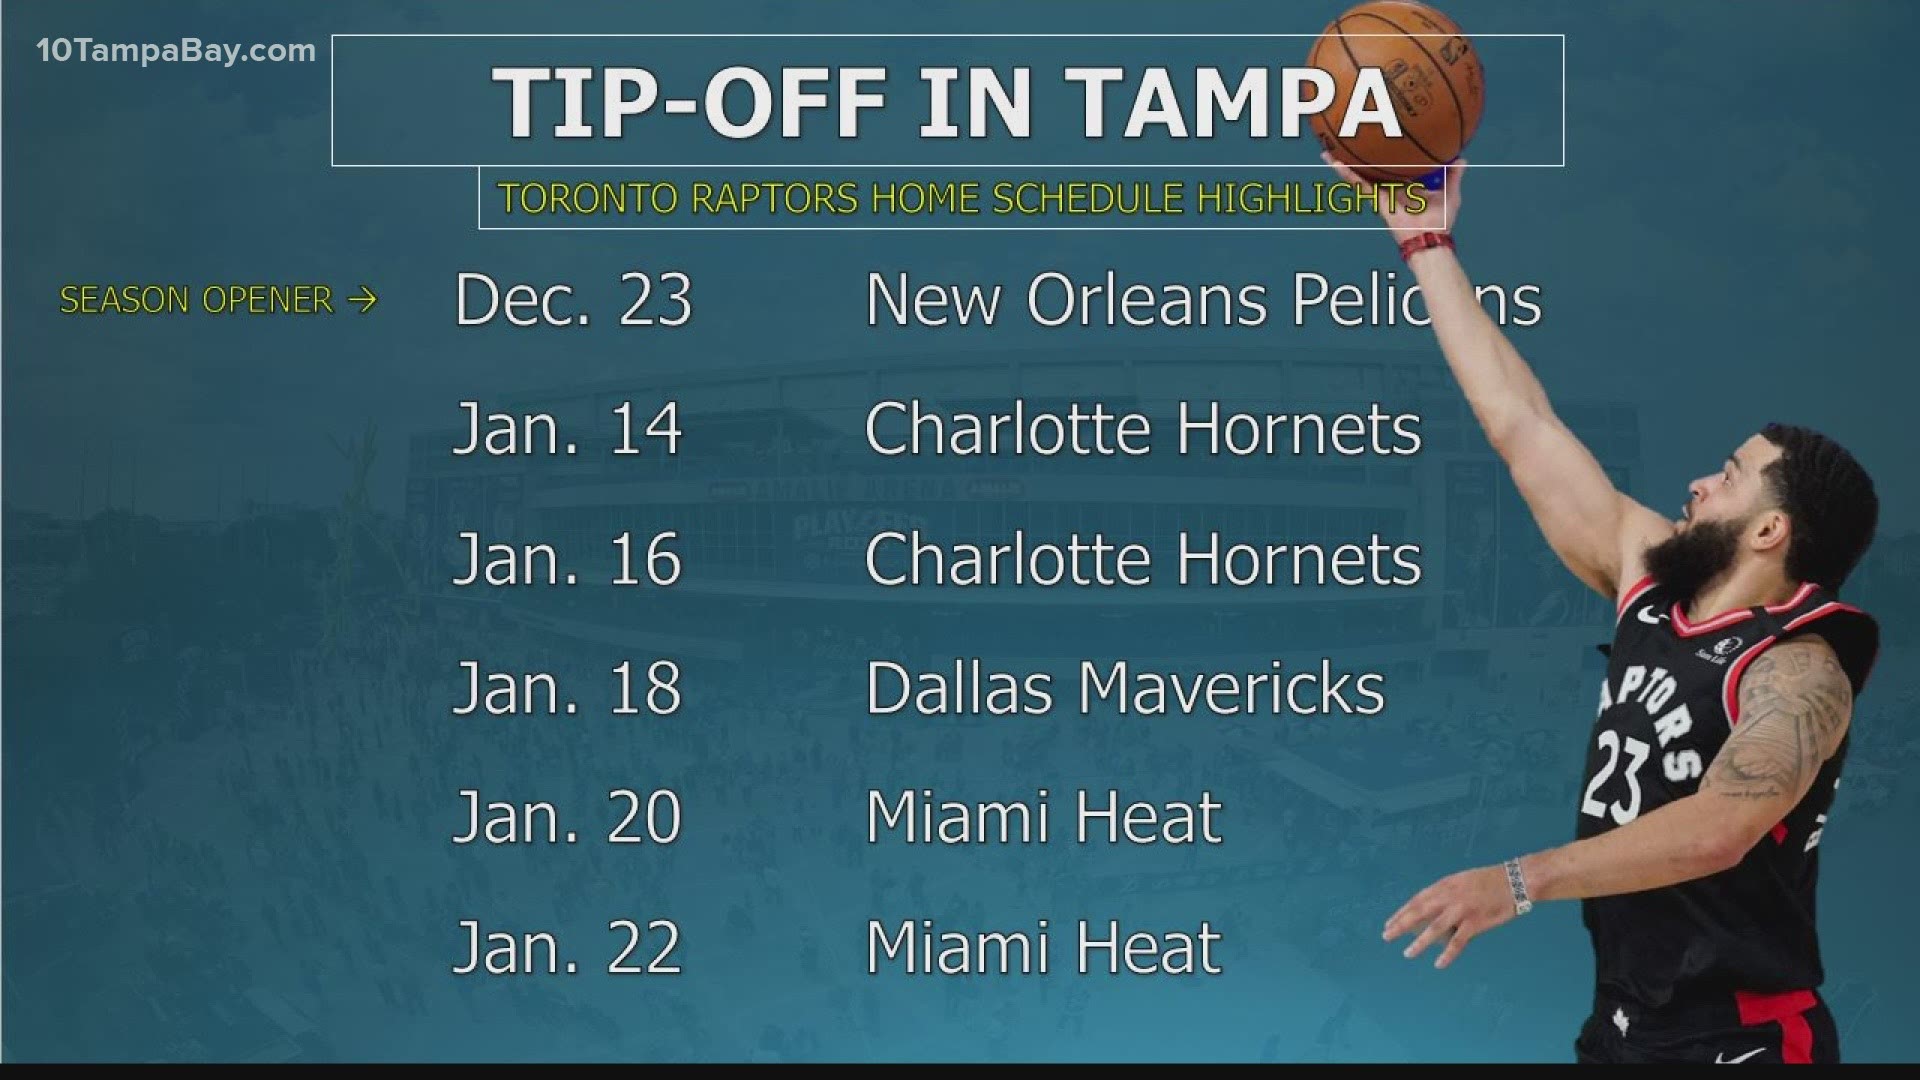 Tampa tipoff is set for 7:30 p.m. on Dec. 23 against the New Orleans Pelicans.